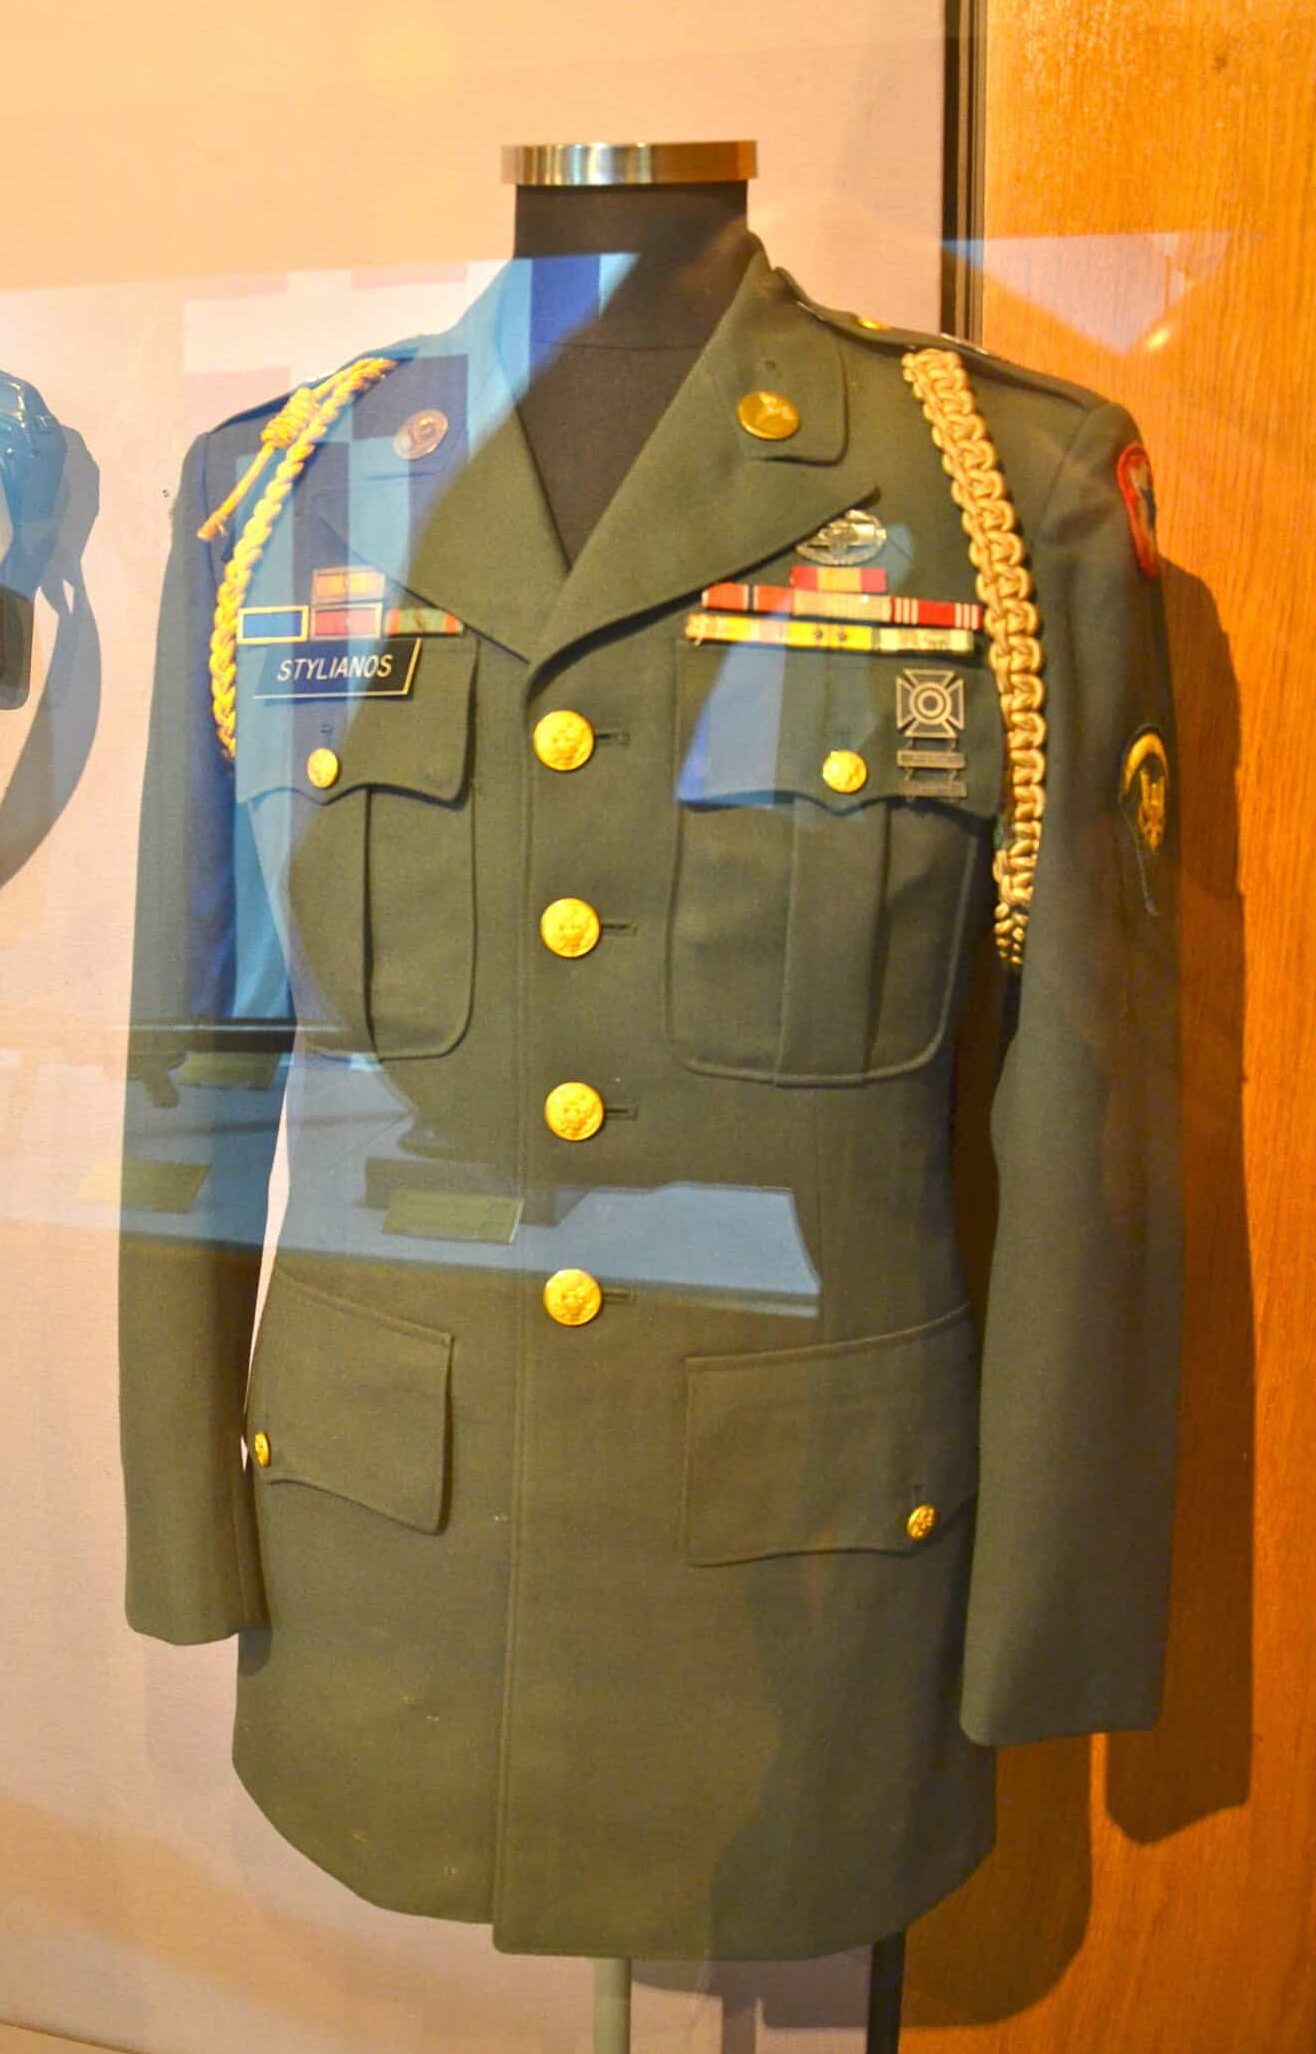 Uniform of a US officer of Greek descent in 1974 Cyprus